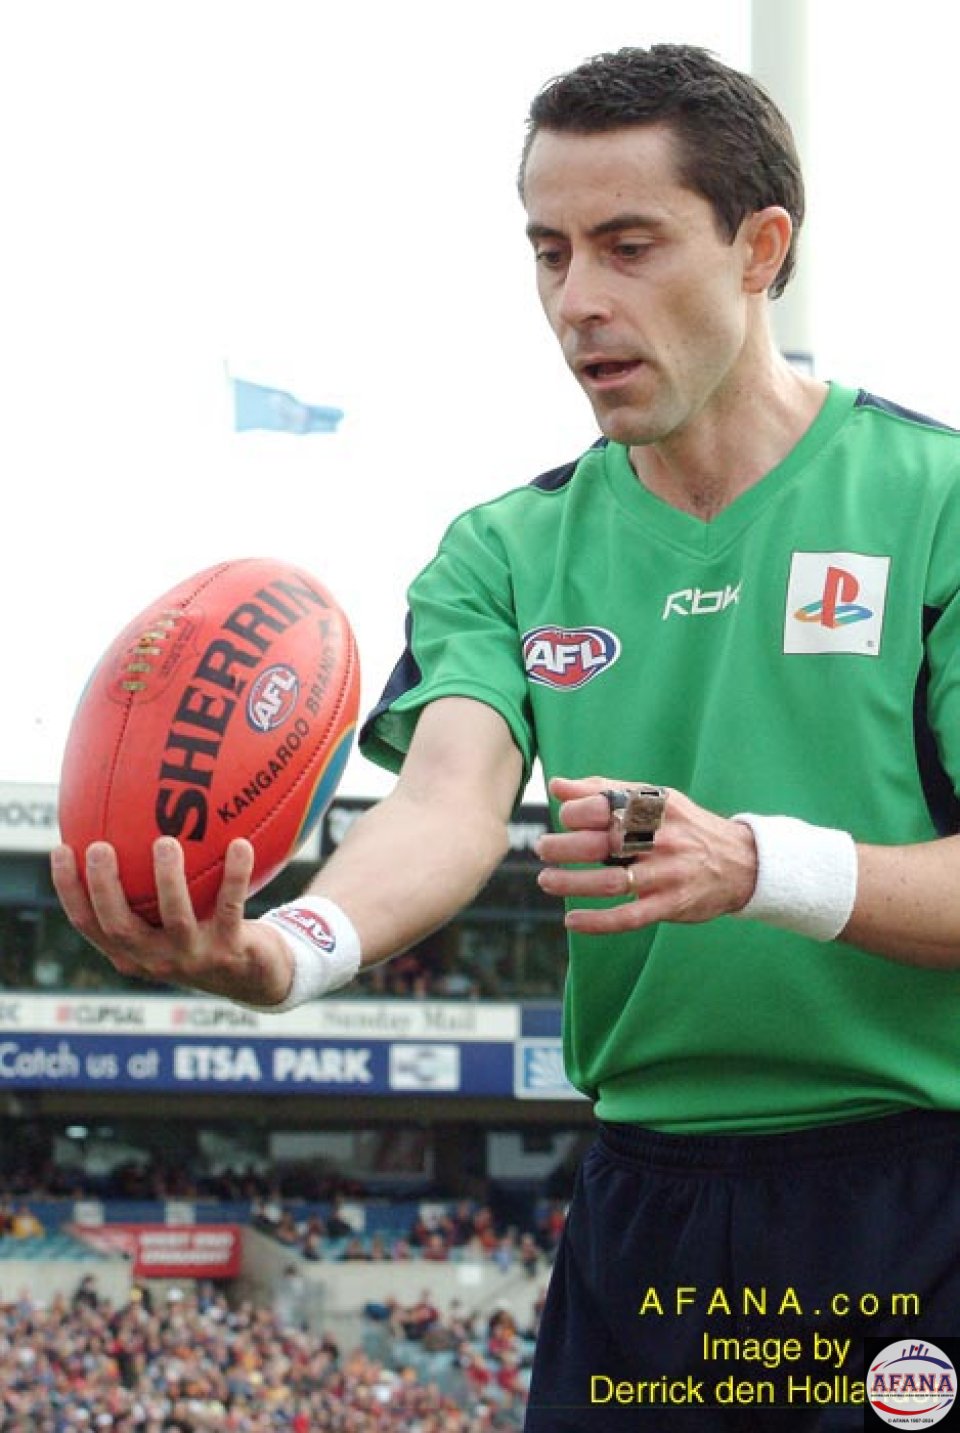 [b]A Field Umpire prepares to throw the ball back into play at a boundary stoppage[/b]